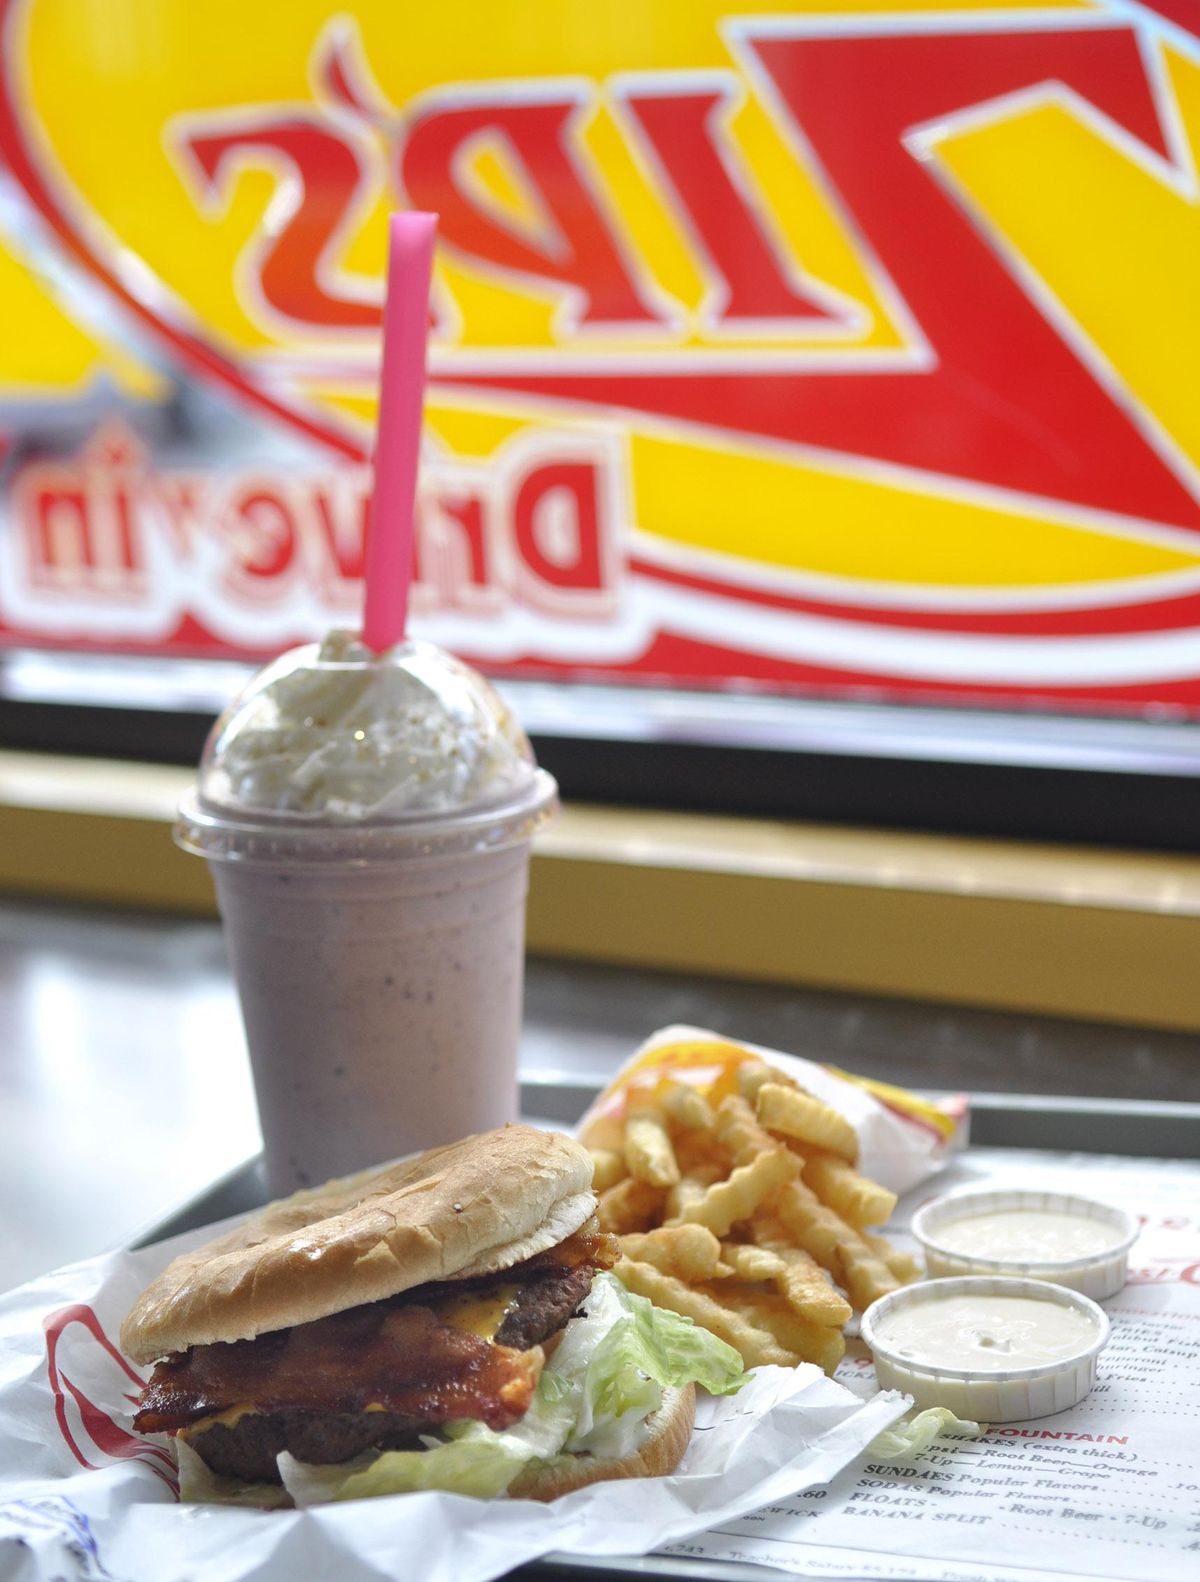 A huckleberry shake, a bacon burger and Zip’s signature crinkle-cut fries - it’s what Spokane likes to eat. (Adriana Janovich / The Spokesman-Review)